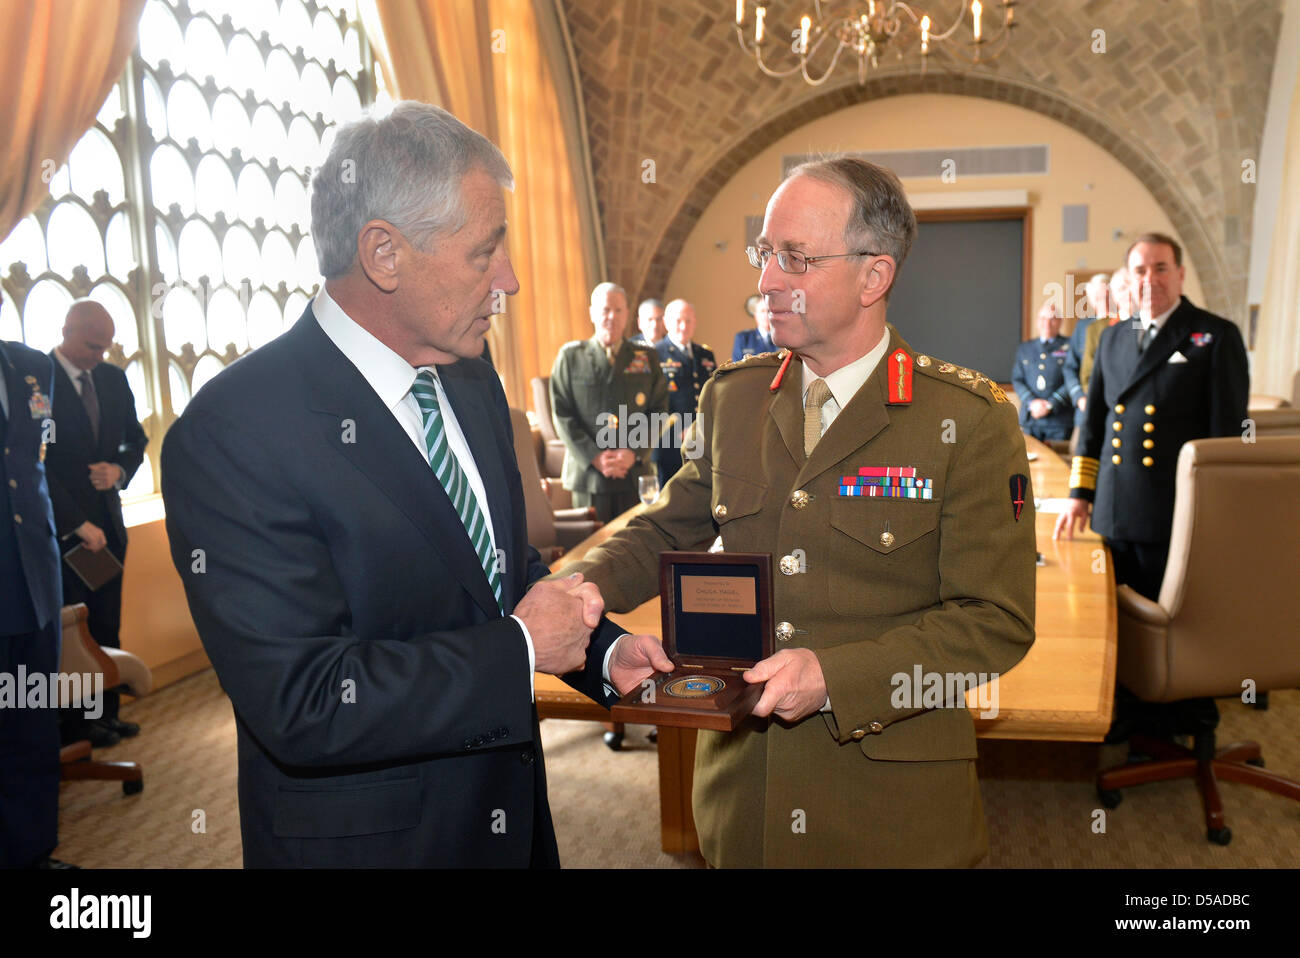 US Secretary of Defense Chuck Hagel presents British Chief of the Defence Staff General David Richards with the Secretary of Defense medallion at the National Defense University at Fort McNair March 27, 2013 in Washington, DC. This is the first meeting of its kind since 1948 and was called to discuss strategic challenges the UK and US militaries may face together in the future. Stock Photo